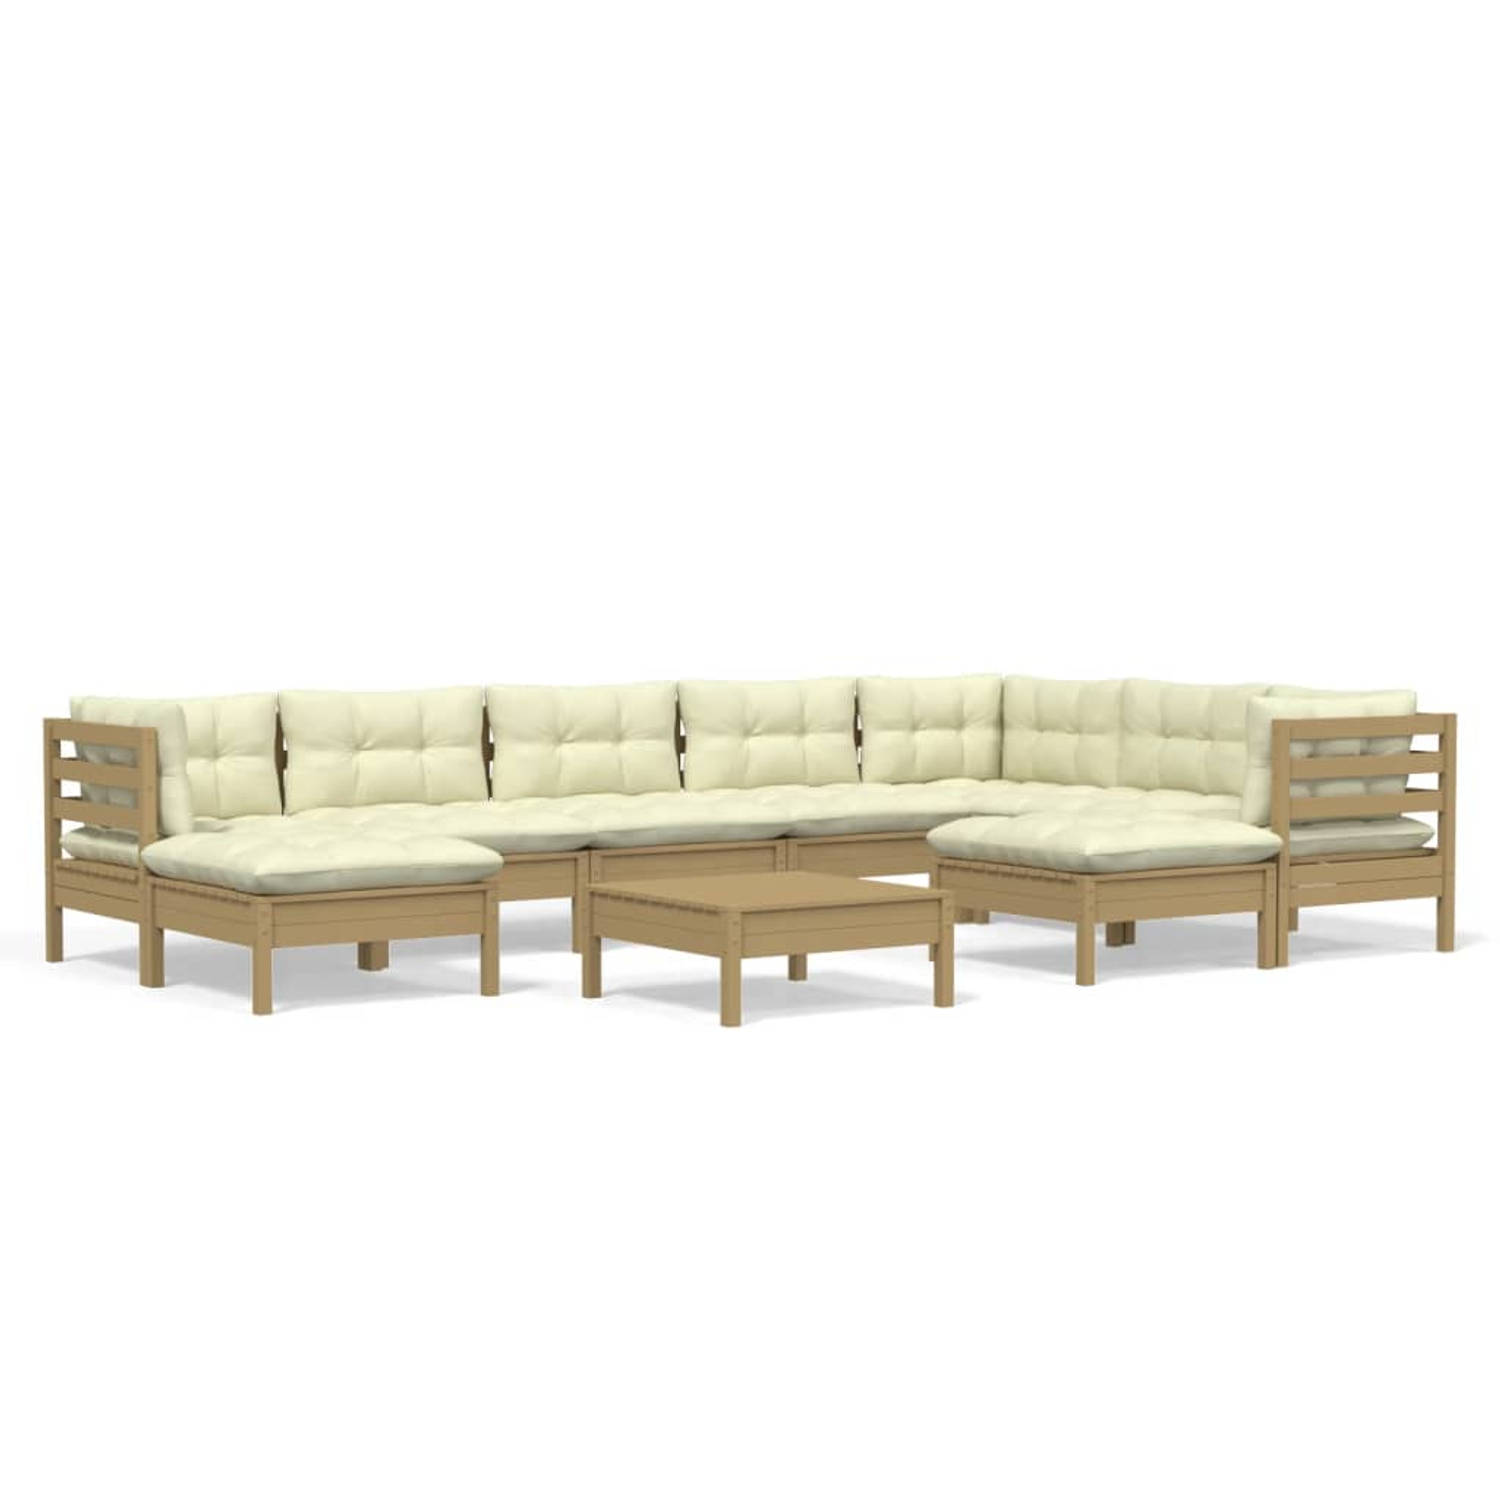 The Living Store Loungeset - Grenenhout - Honingbruin - 63.5x63.5x62.5 cm - Inclusief kussens